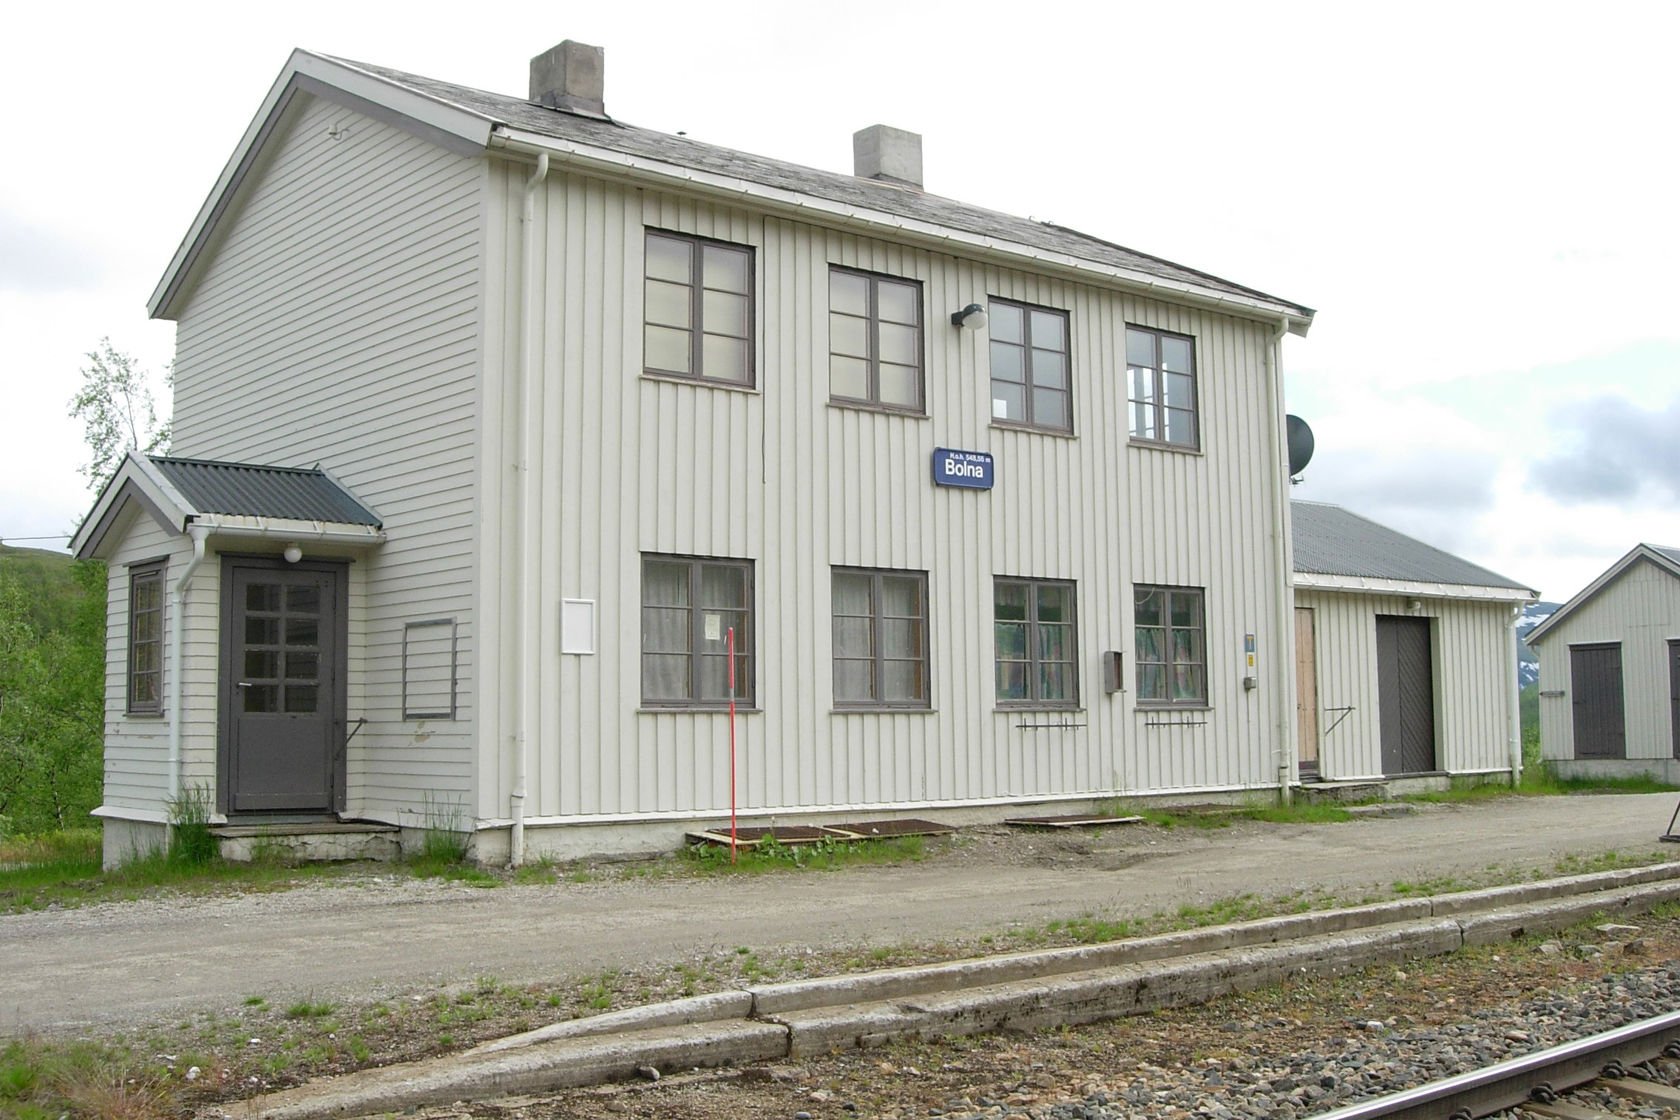 The station building at Bolna station